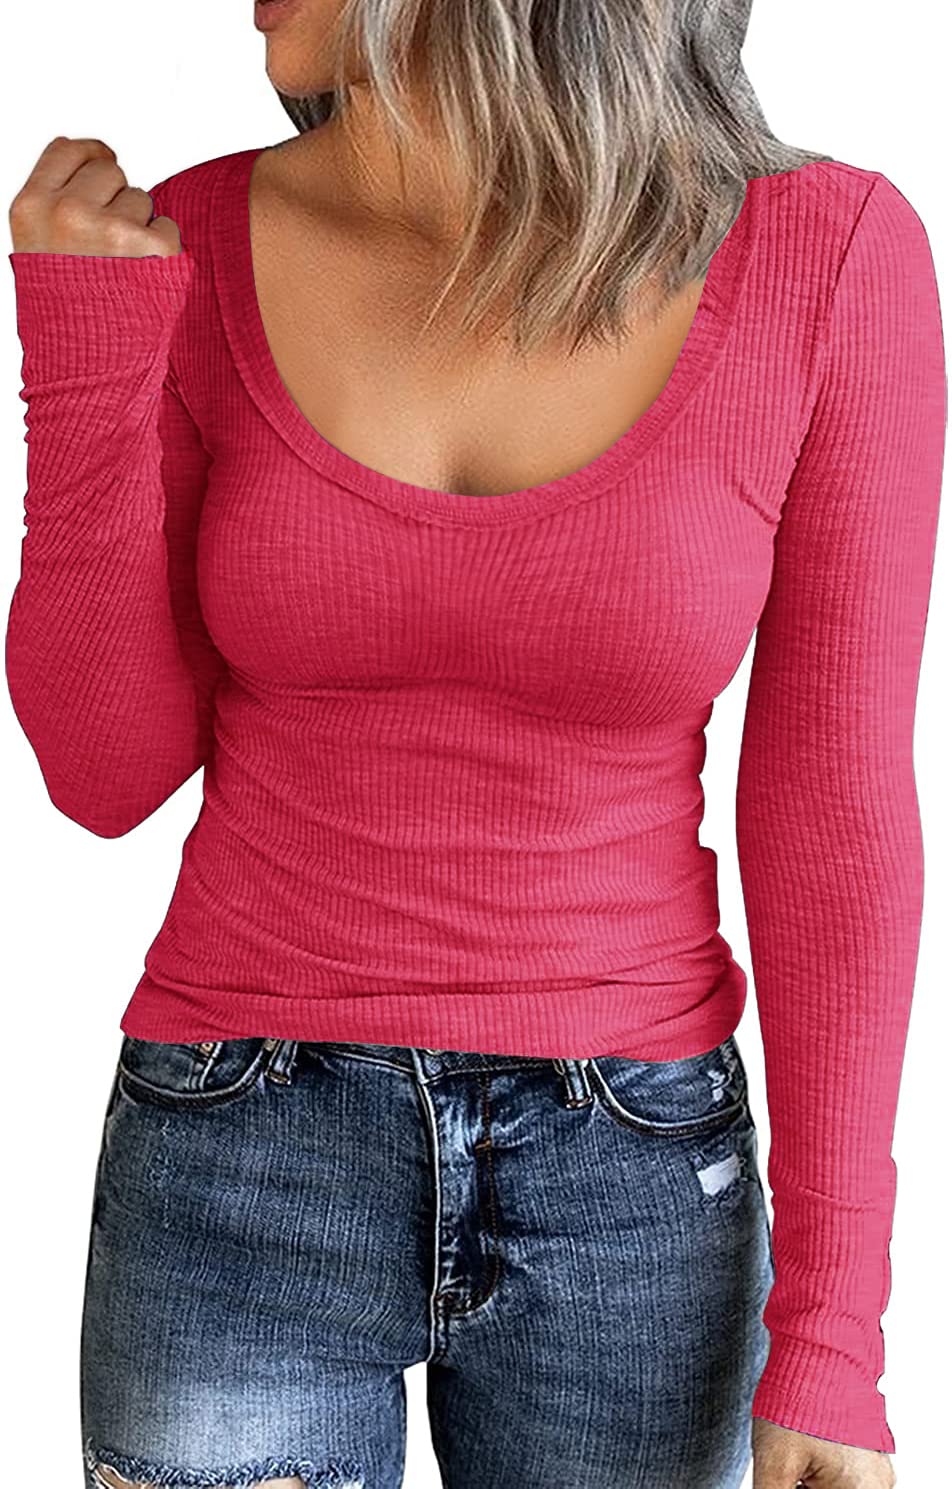 Roselux Women Long Sleeve Scoop Neck Ribbed Fitted Knit Shirt Cotton Basic Thermal Henley Tops (Hot Pink M)